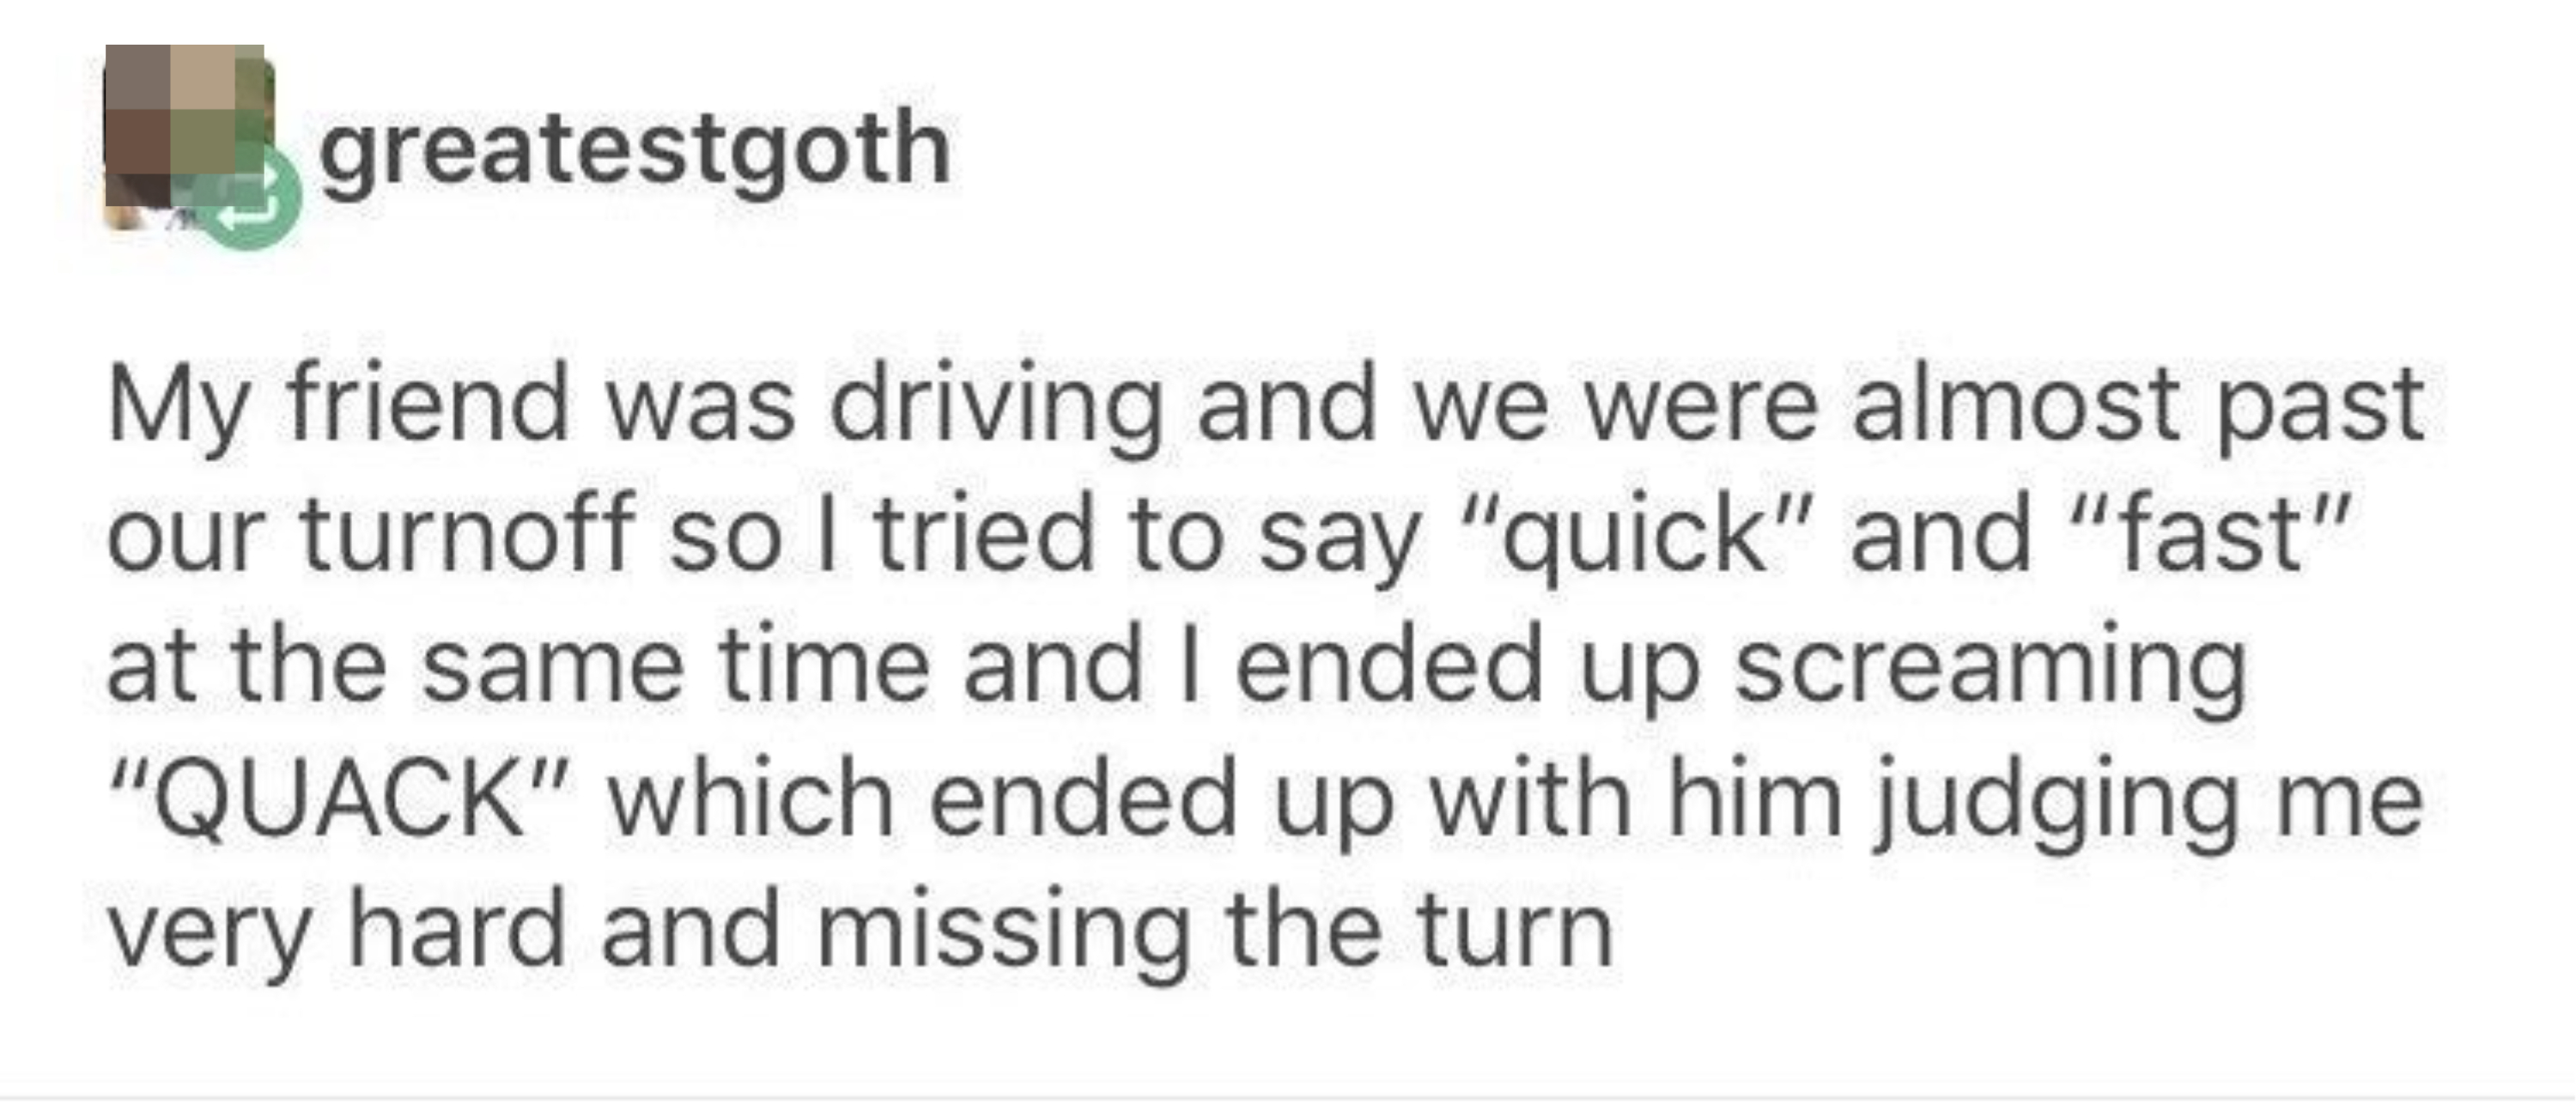 Tumblr post: &quot;My friend was driving and we were almost past our turnoff so i tried to say &#x27;quick&#x27; and &#x27;fast&#x27; at the same time and ended up screaming &#x27;quack&#x27;&quot;